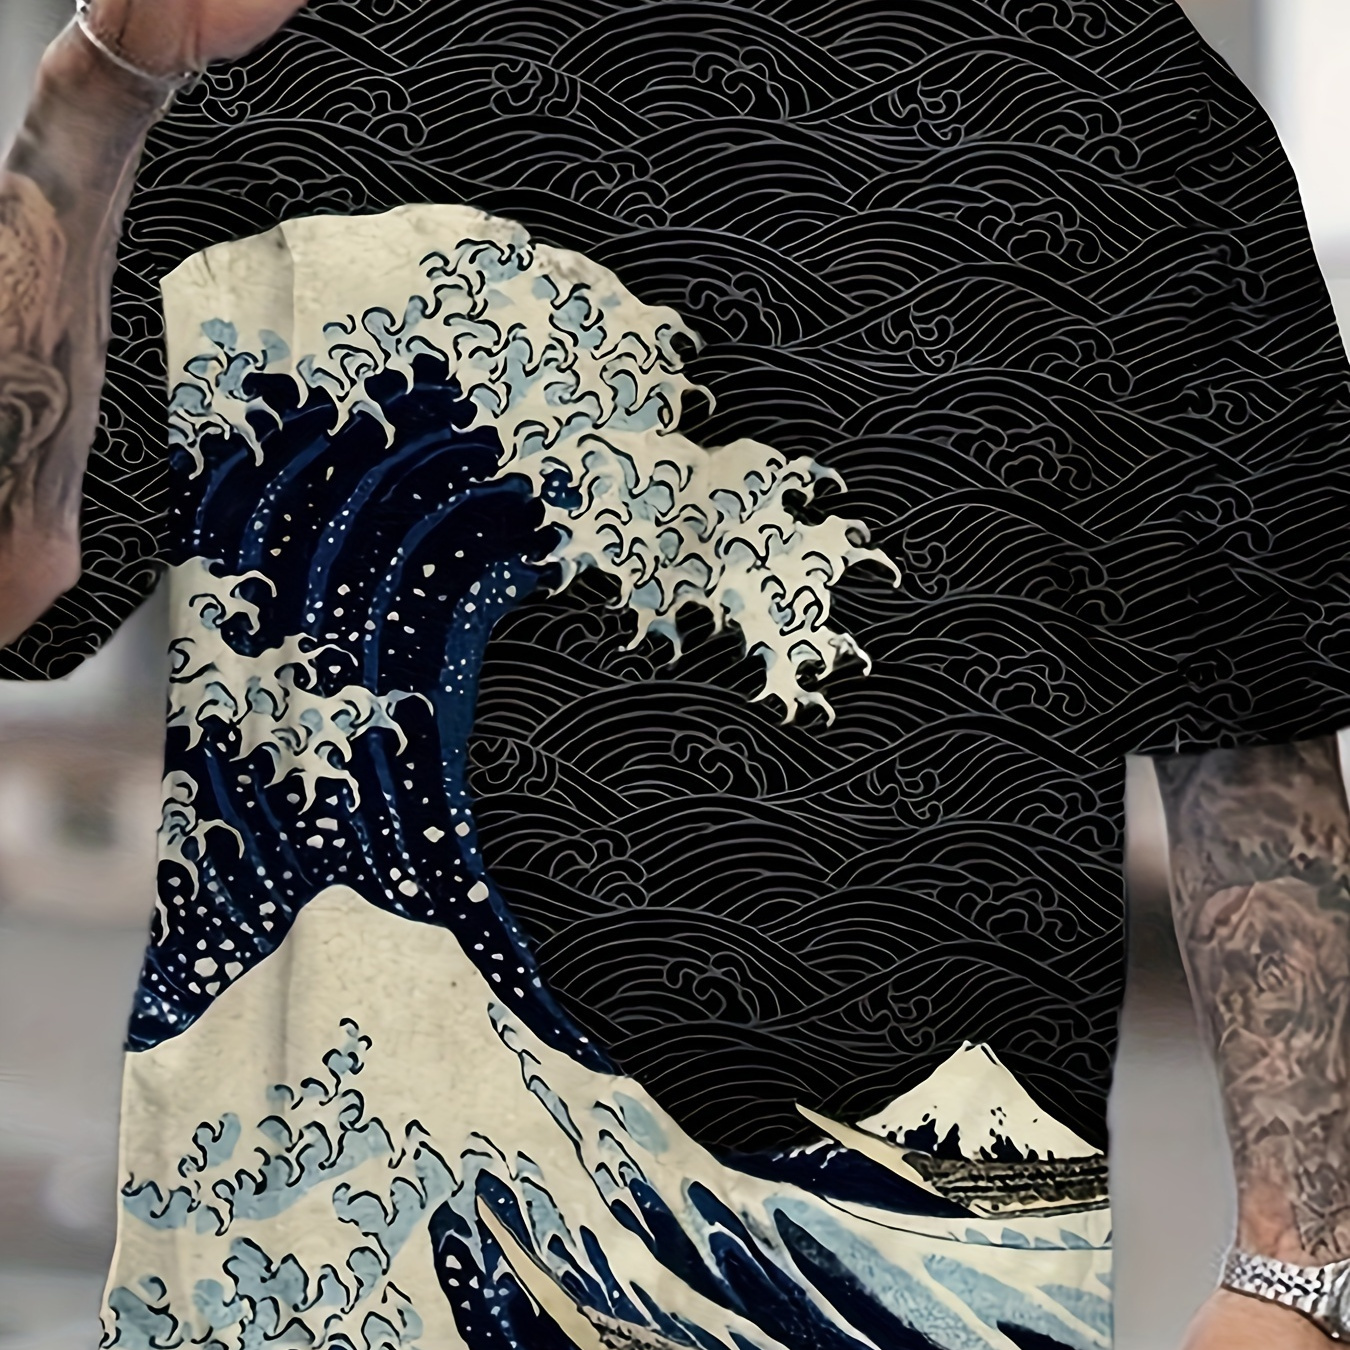 

Men's Ukiyo-e Style Sea Wave Pattern Short Sleeve Crew Neck T-shirt, Tees For Men, Stylish And Chic Tops For Summer Street Wear